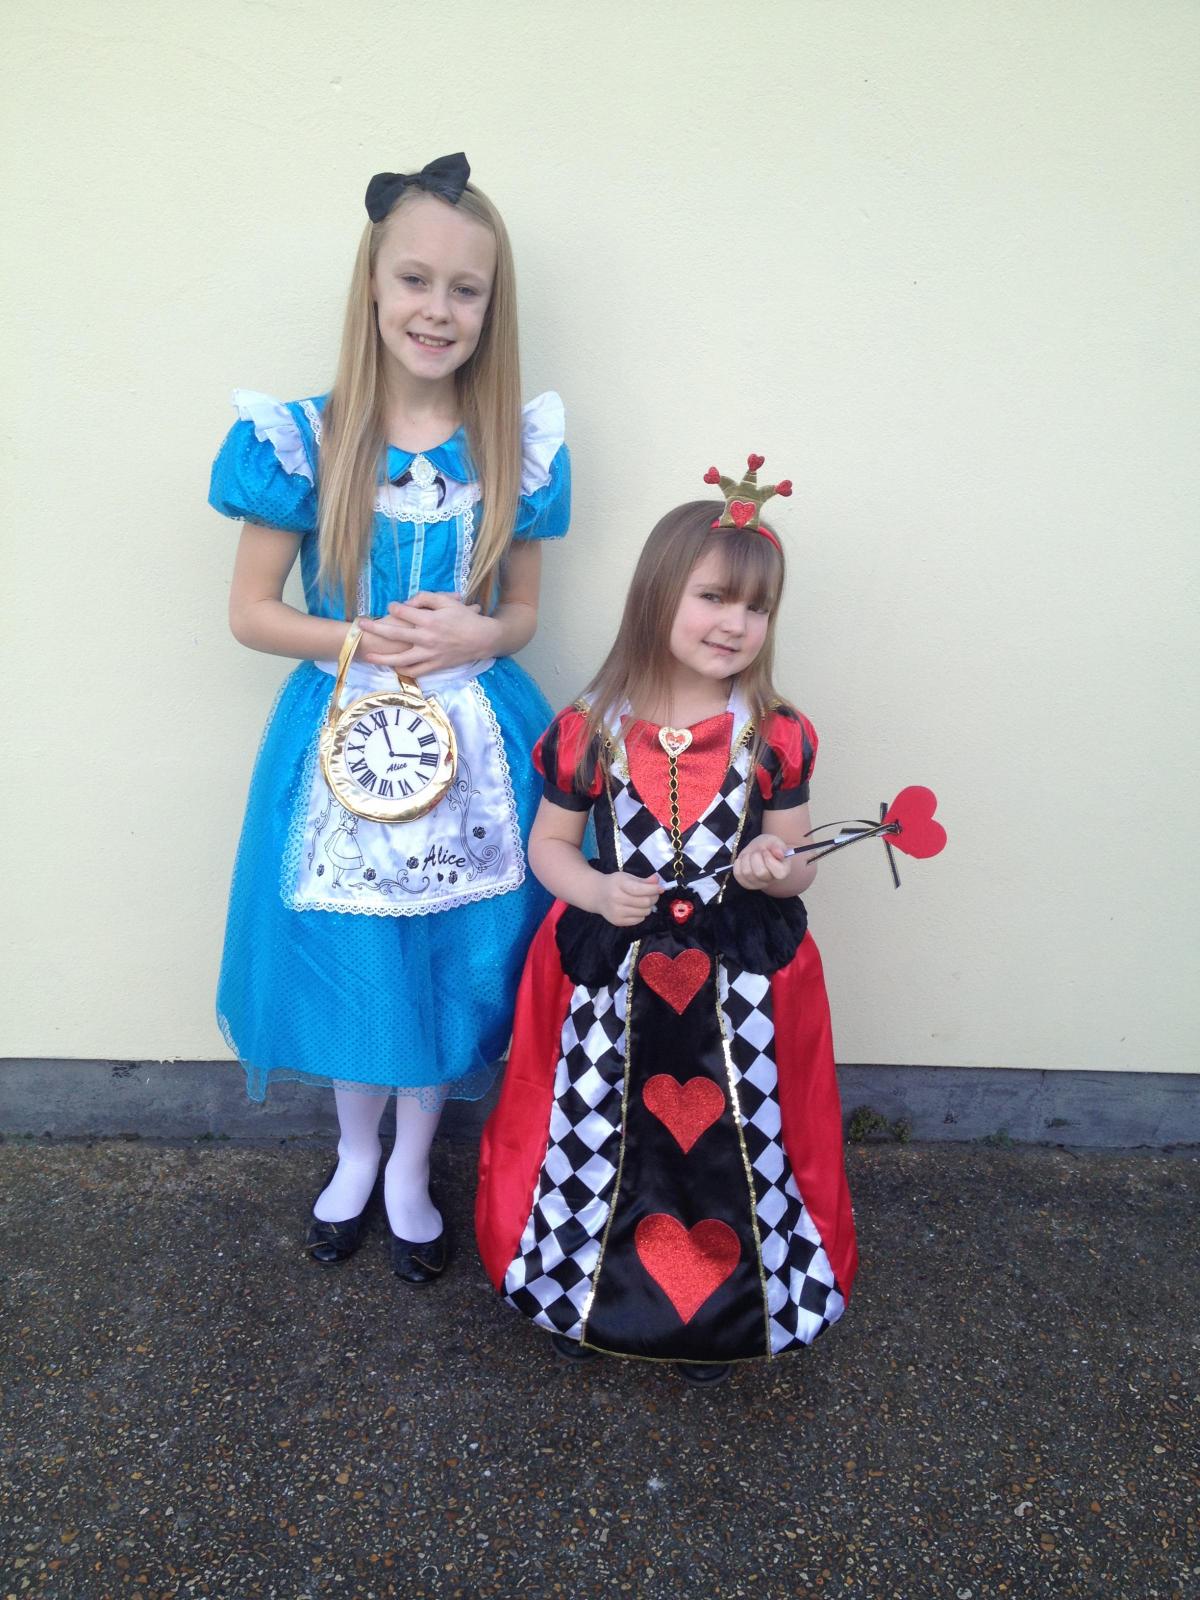 Chloe Andrews as Alice - aged 11

Lucie Marshall as Queen of Hearts - aged 5

Mansbridge Primary School